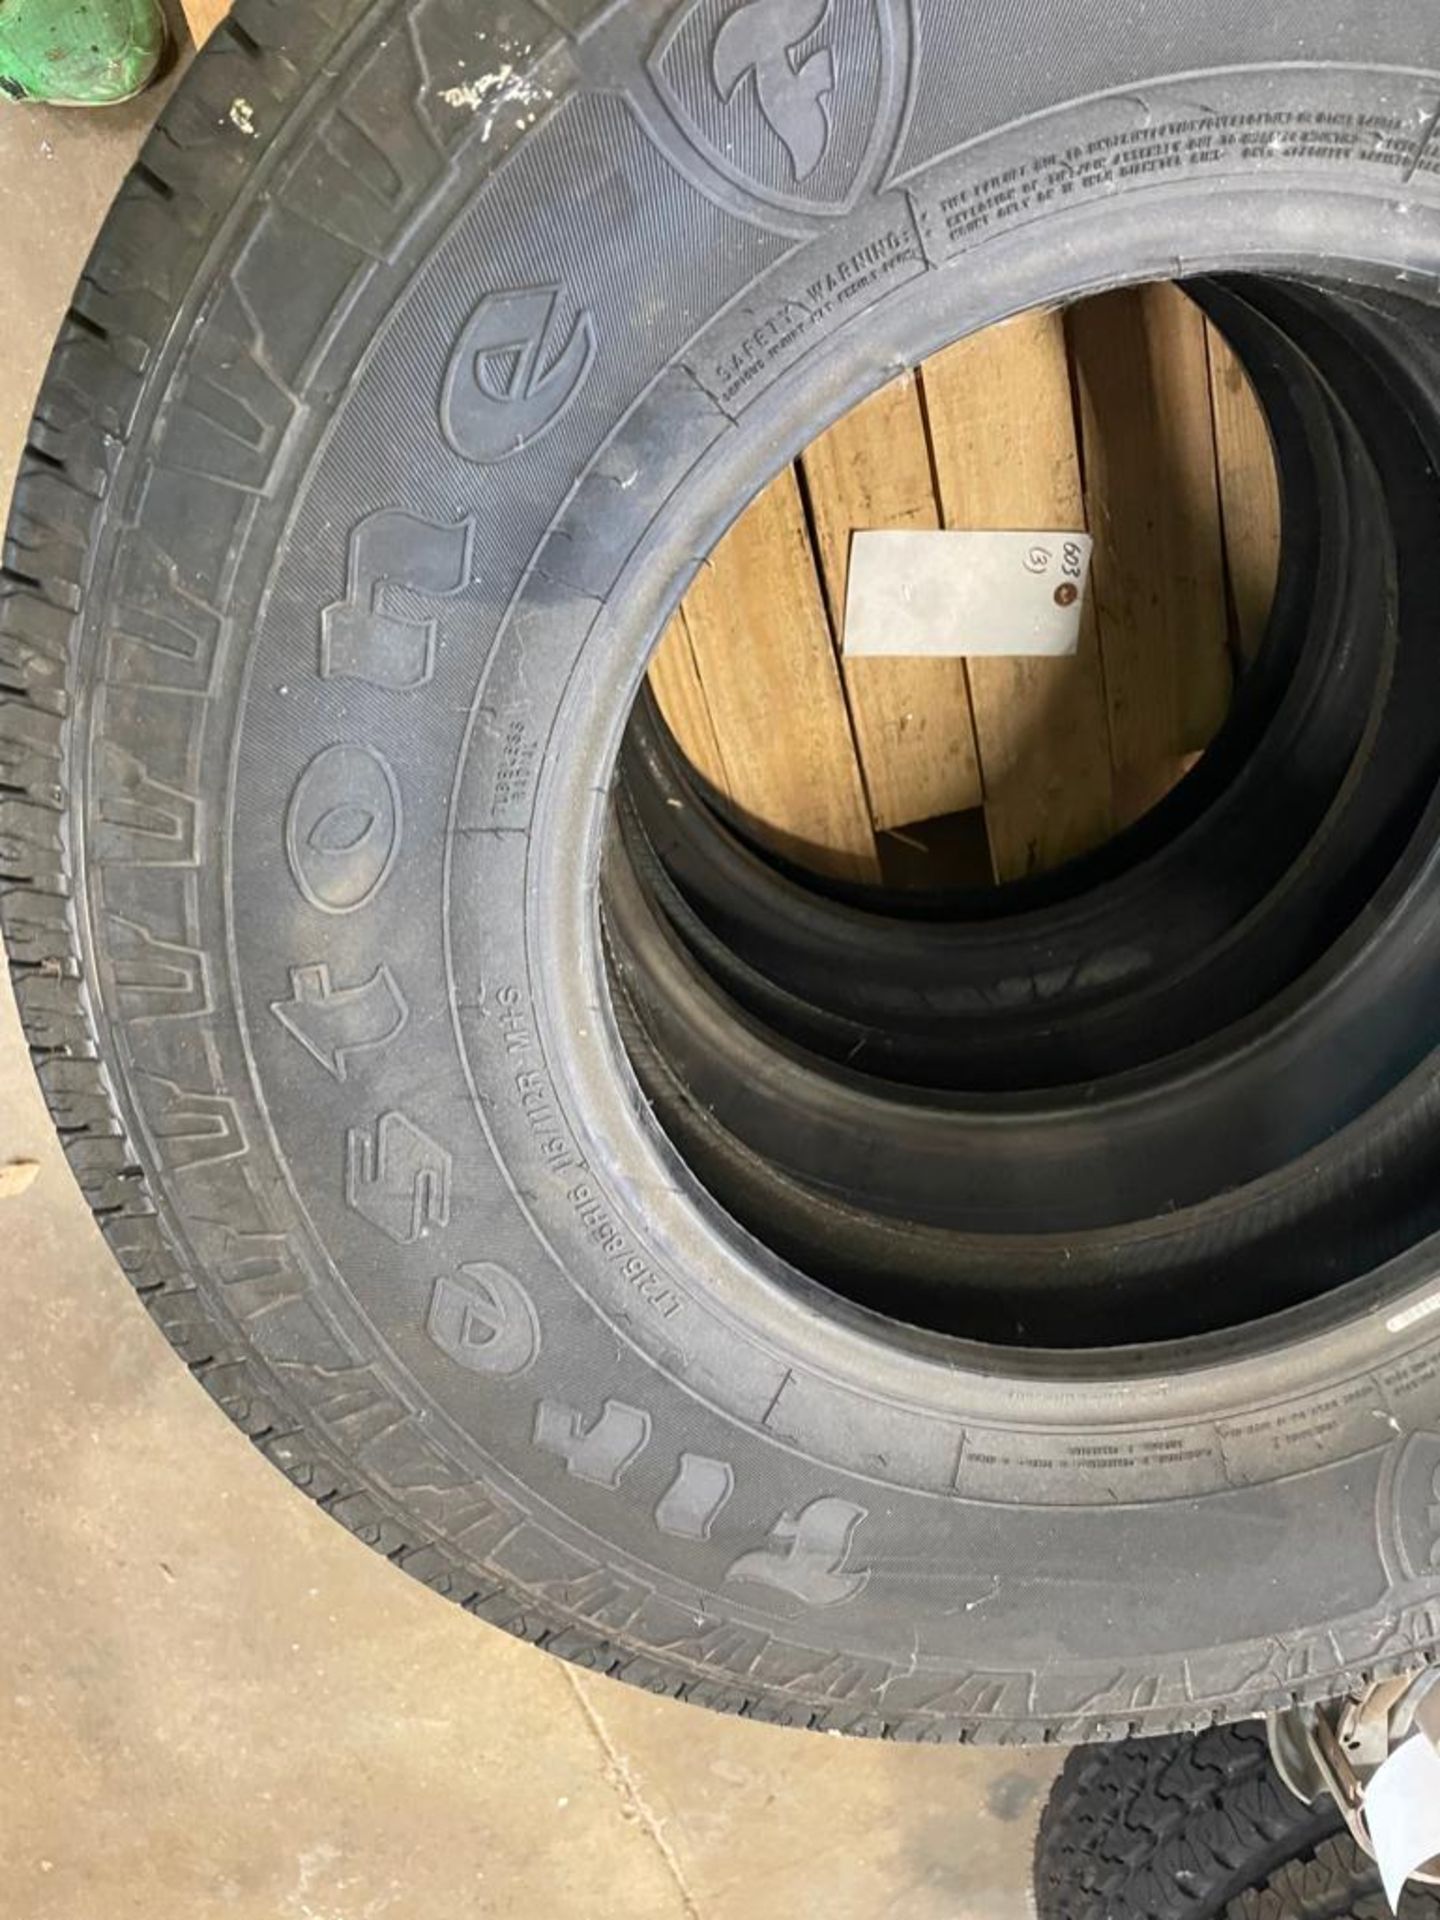 (3) New Firestone Transforce HT2, LT215/85R16 Tires. Located in Hazelwood, MO - Image 3 of 4